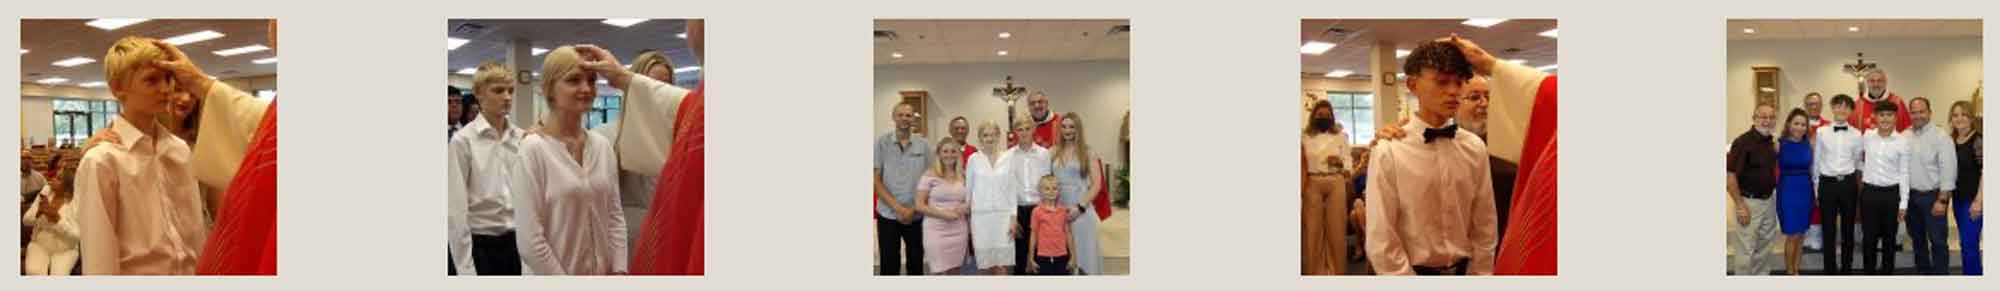 St. Faustina Catholic Church Clermont - Confirmation group